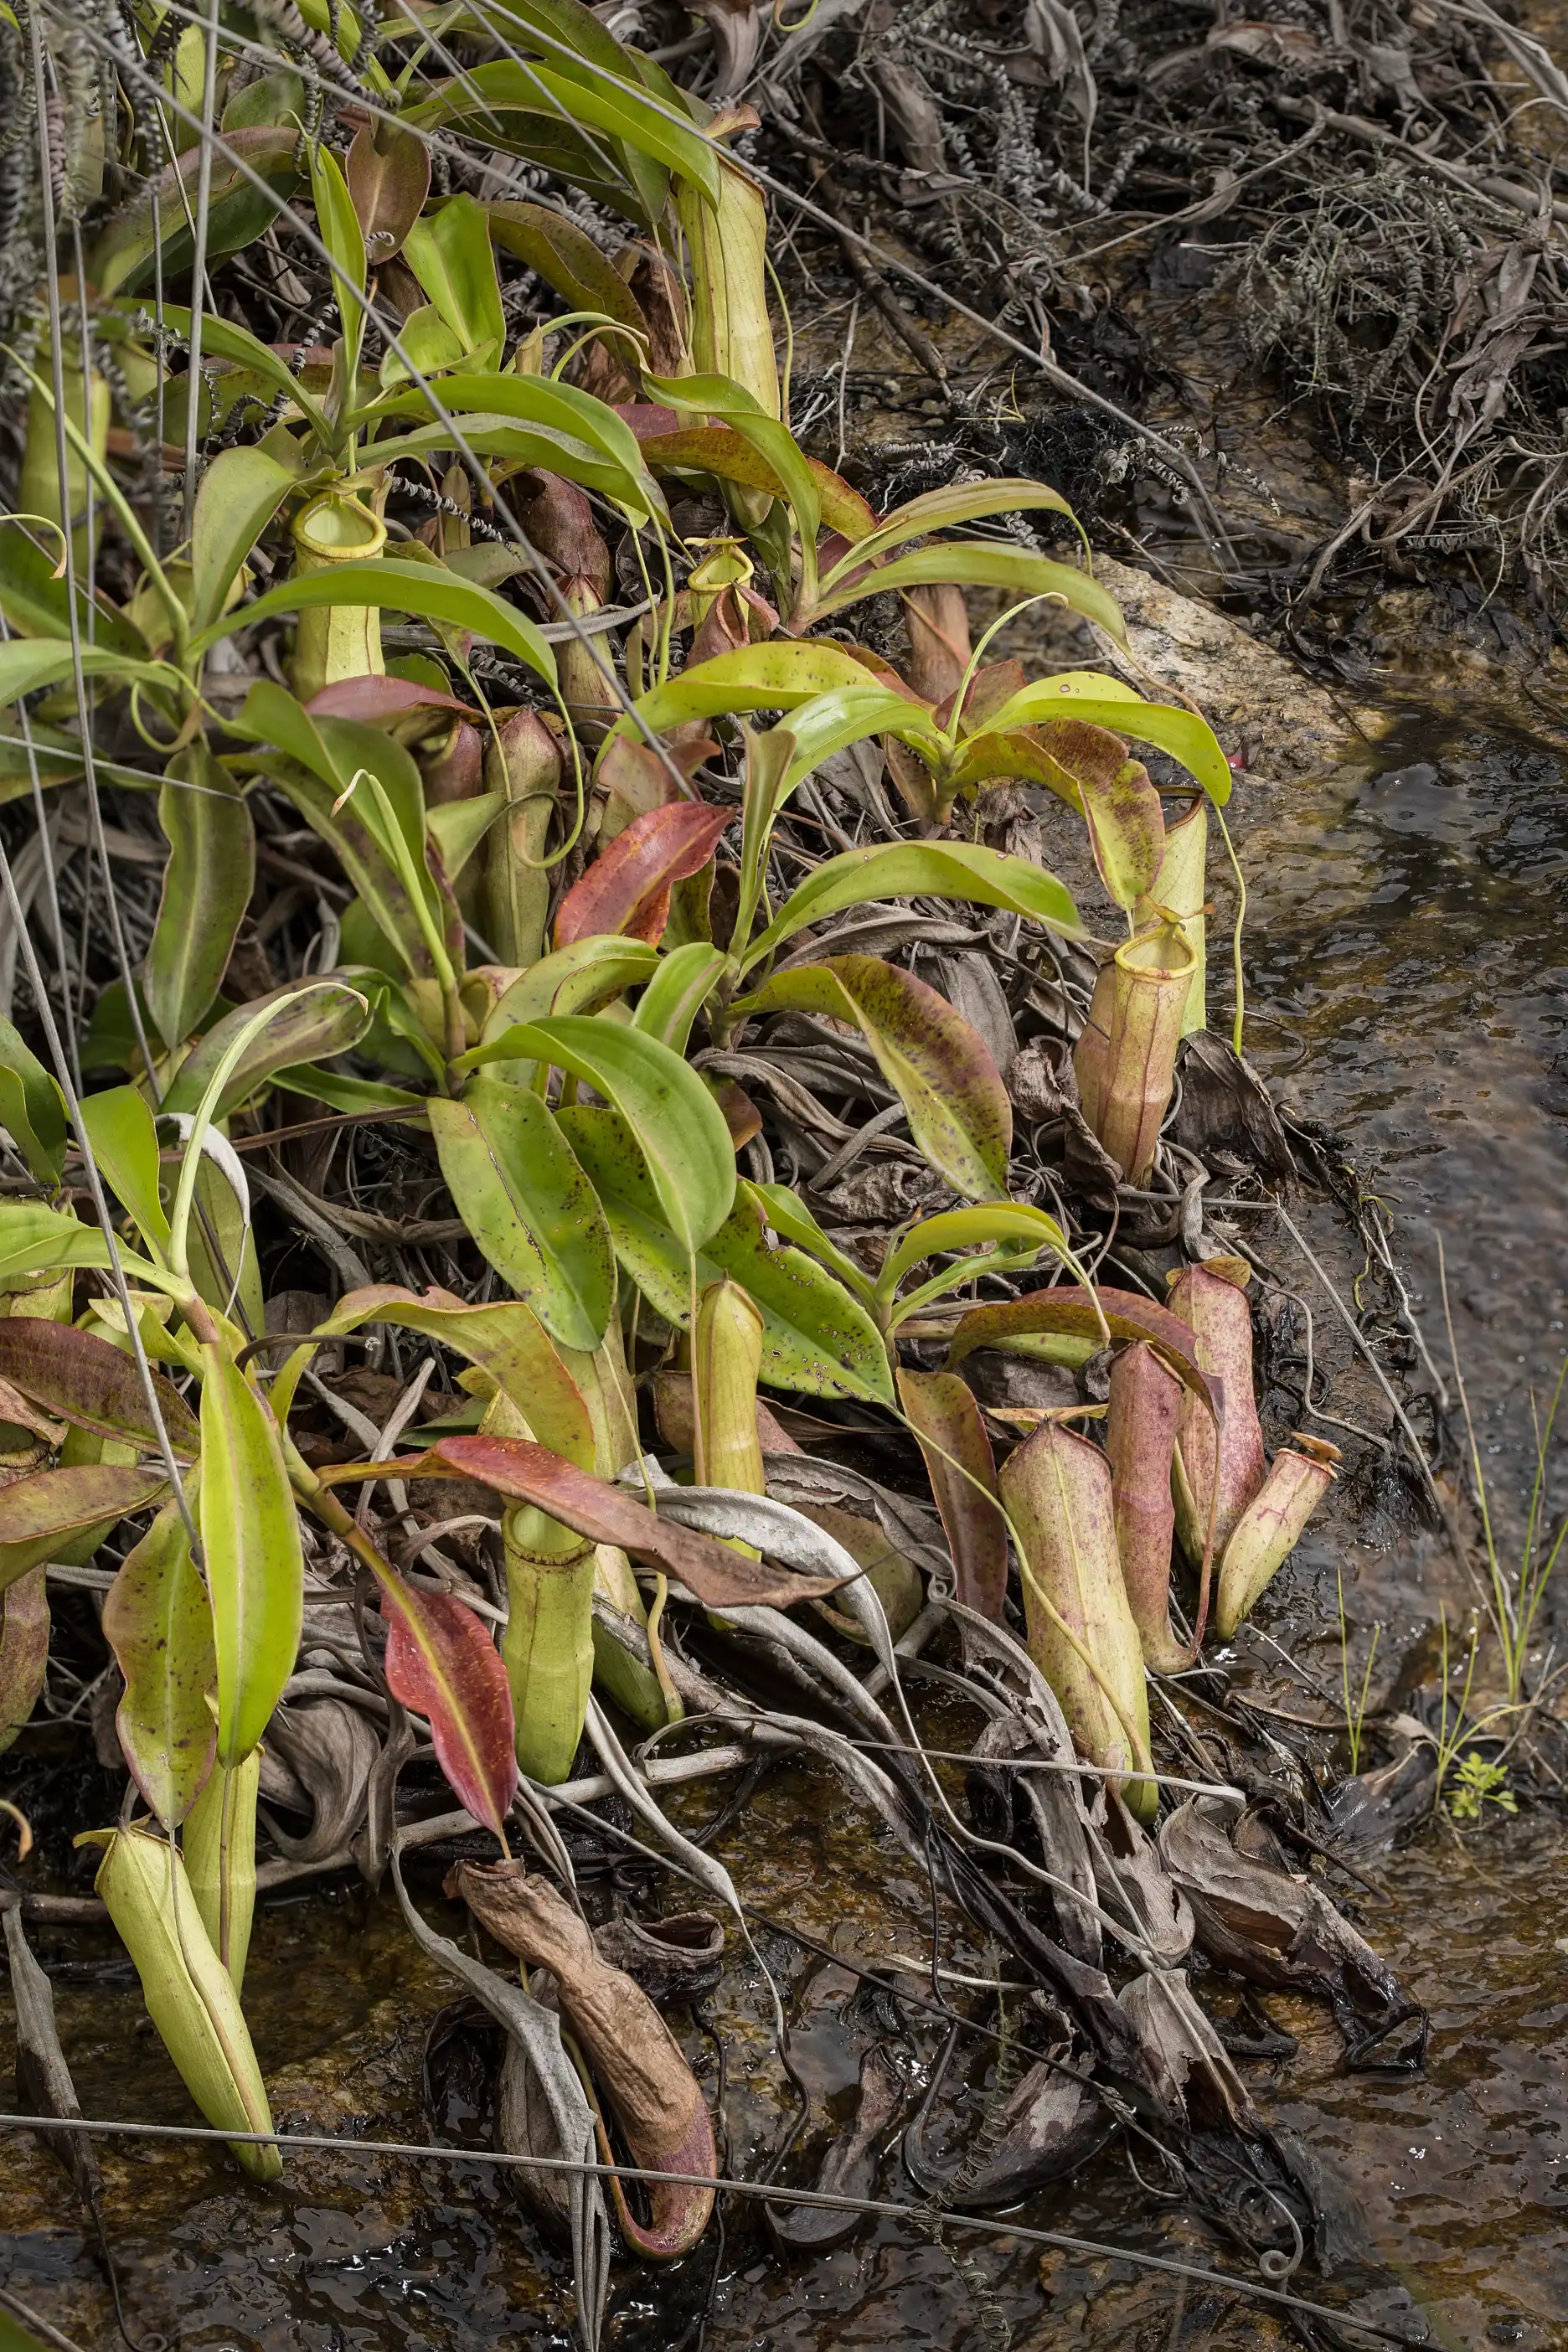 A group of Nepenthes mirabilis grow in Macau, China